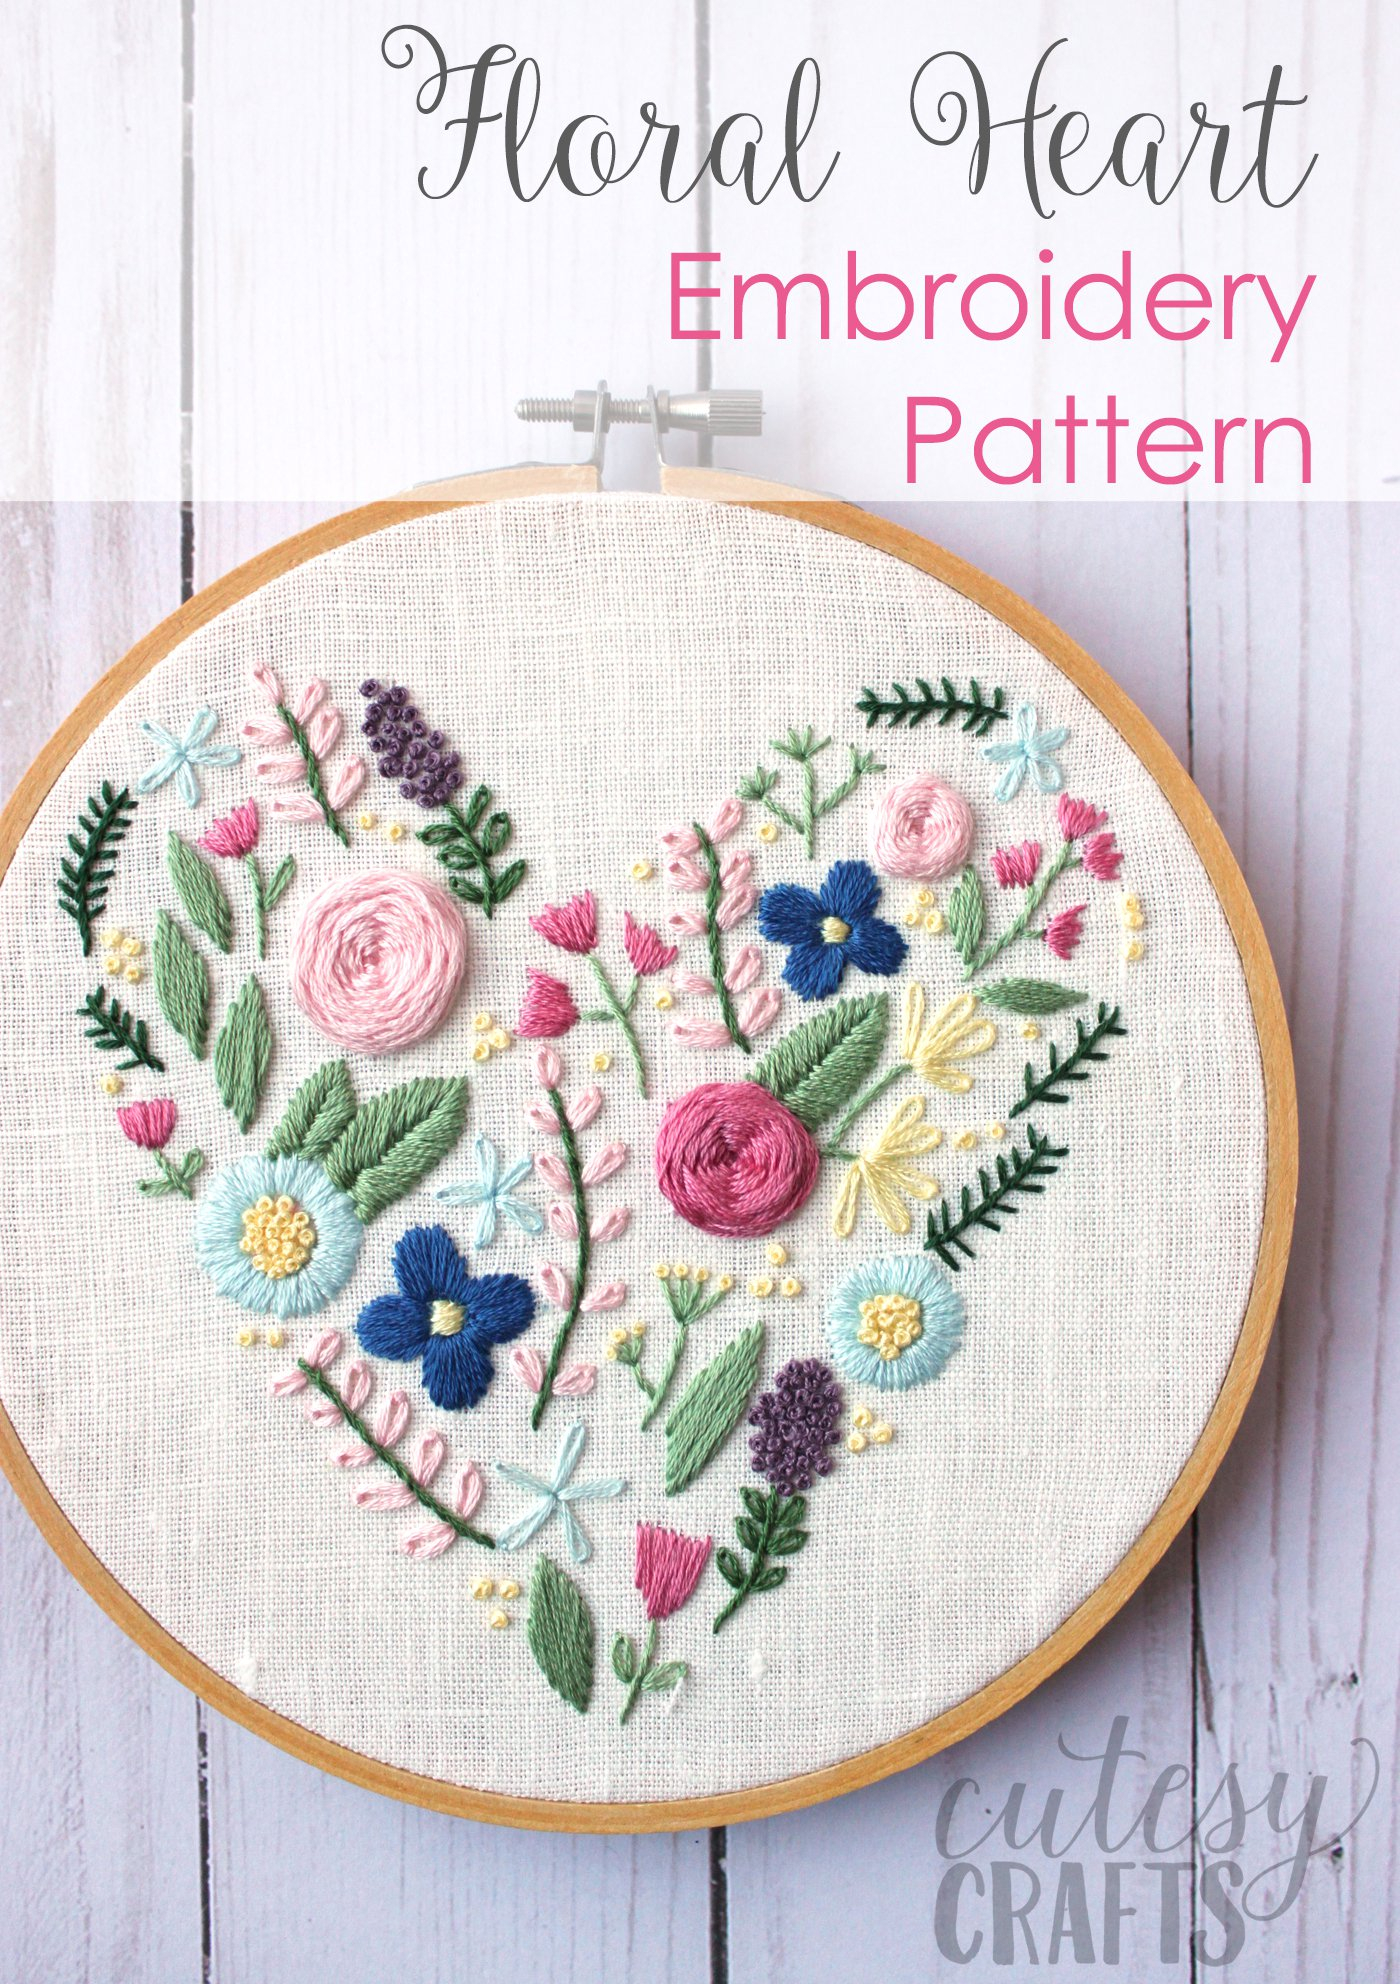 Embroidery Patterns Flowers Floral Heart Hand Embroidery Pattern The Polka Dot Chair